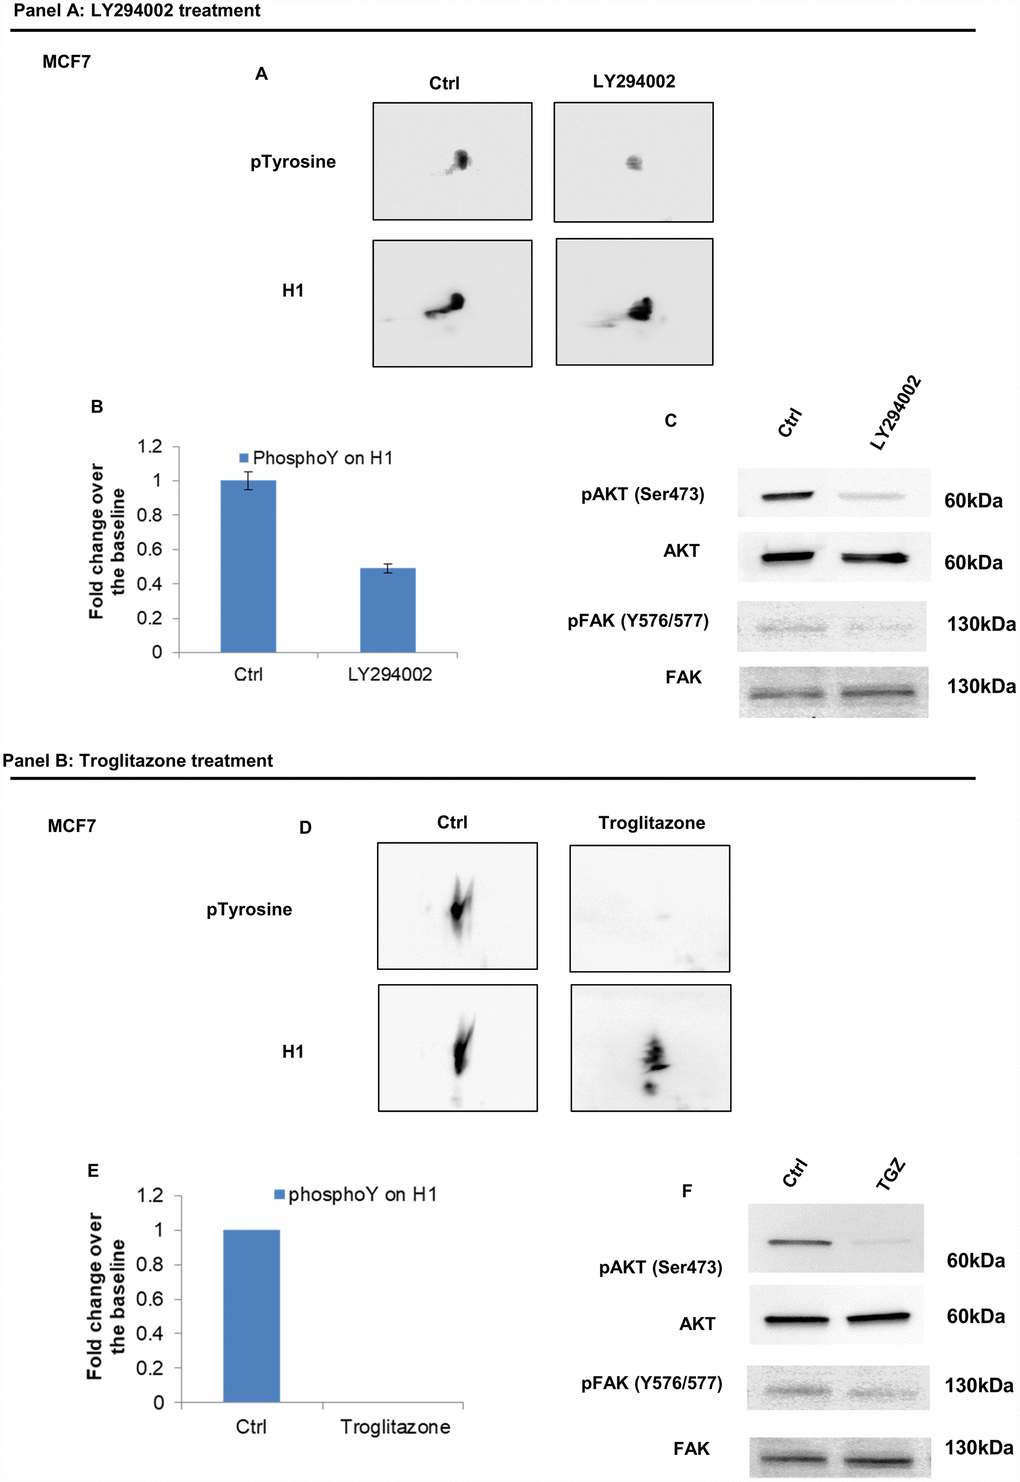 Analysis of H1 histone tyrosine phosphorylation following LY294002 and Troglitazone treatments in MCF7 cells. (Panel A) (A) 2D TAU Western blot analysis of histone H1 tyrosine phosphorylation level (upper panel) and relative normalization with H1 antibody (lower panel) after treatment of MCF7 with LY294002; All WB images were acquired in 4 seconds. (B) Densitometry analysis of H1 tyrosine phosphorylation spots; (C) Western blot analysis of pAKT, and pFAK (Y576/577) levels in protein extracts from LY294002 treated cells. Phospho-Akt (ser473) and pFAK (Y576/577) signals were normalized to the corresponding total Akt and total FAK, respectively. (Panel B) (D) 2D TAU Western blot analysis of histone H1 tyrosine phosphorylation level (upper panel) and relative normalization with H1 antibody (lower panel) after treatment of MCF7 with Troglitazone; All WB 2D images were acquired in 4 seconds. (E) Densitometry analysis of H1 tyrosine phosphorylation spots; (F) Western blot analysis of pAKT, and pFAK (Y576/577) levels in protein extract from Troglitazone treated cells. Phospho-Akt (ser473) and pFAK (Y576/577) signals were normalized agianst the corresponding total Akt and total FAK respectively. The assays were repeated in three independent biological replicates. Data are expressed as mean ± SEM (N =3).